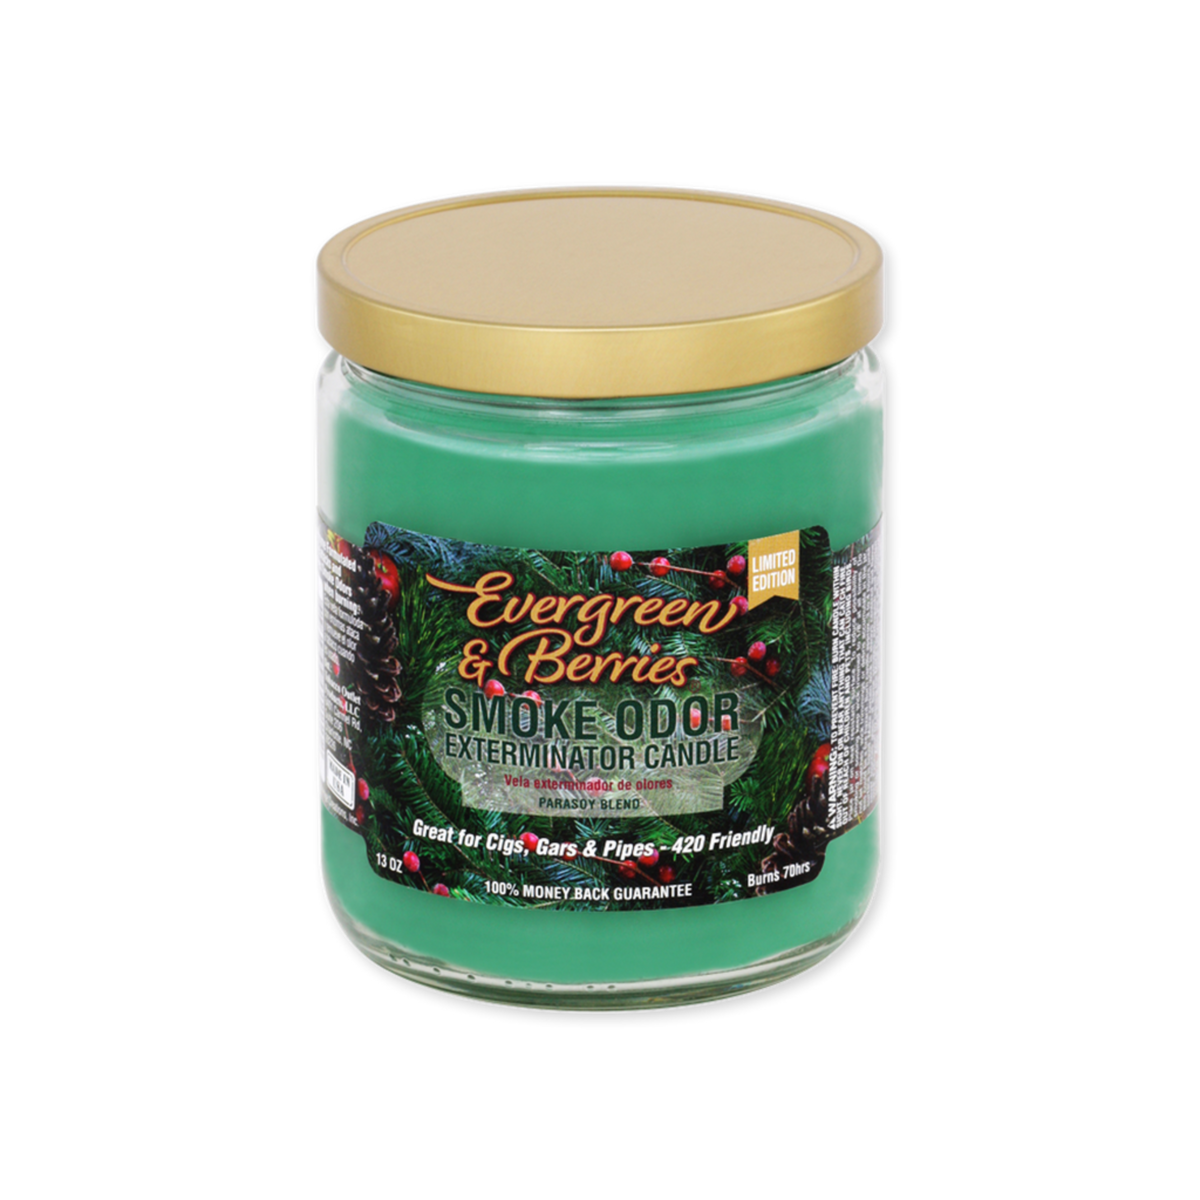 Smoke Odor Exterminator Candle - EVERGREEN AND BERRIES